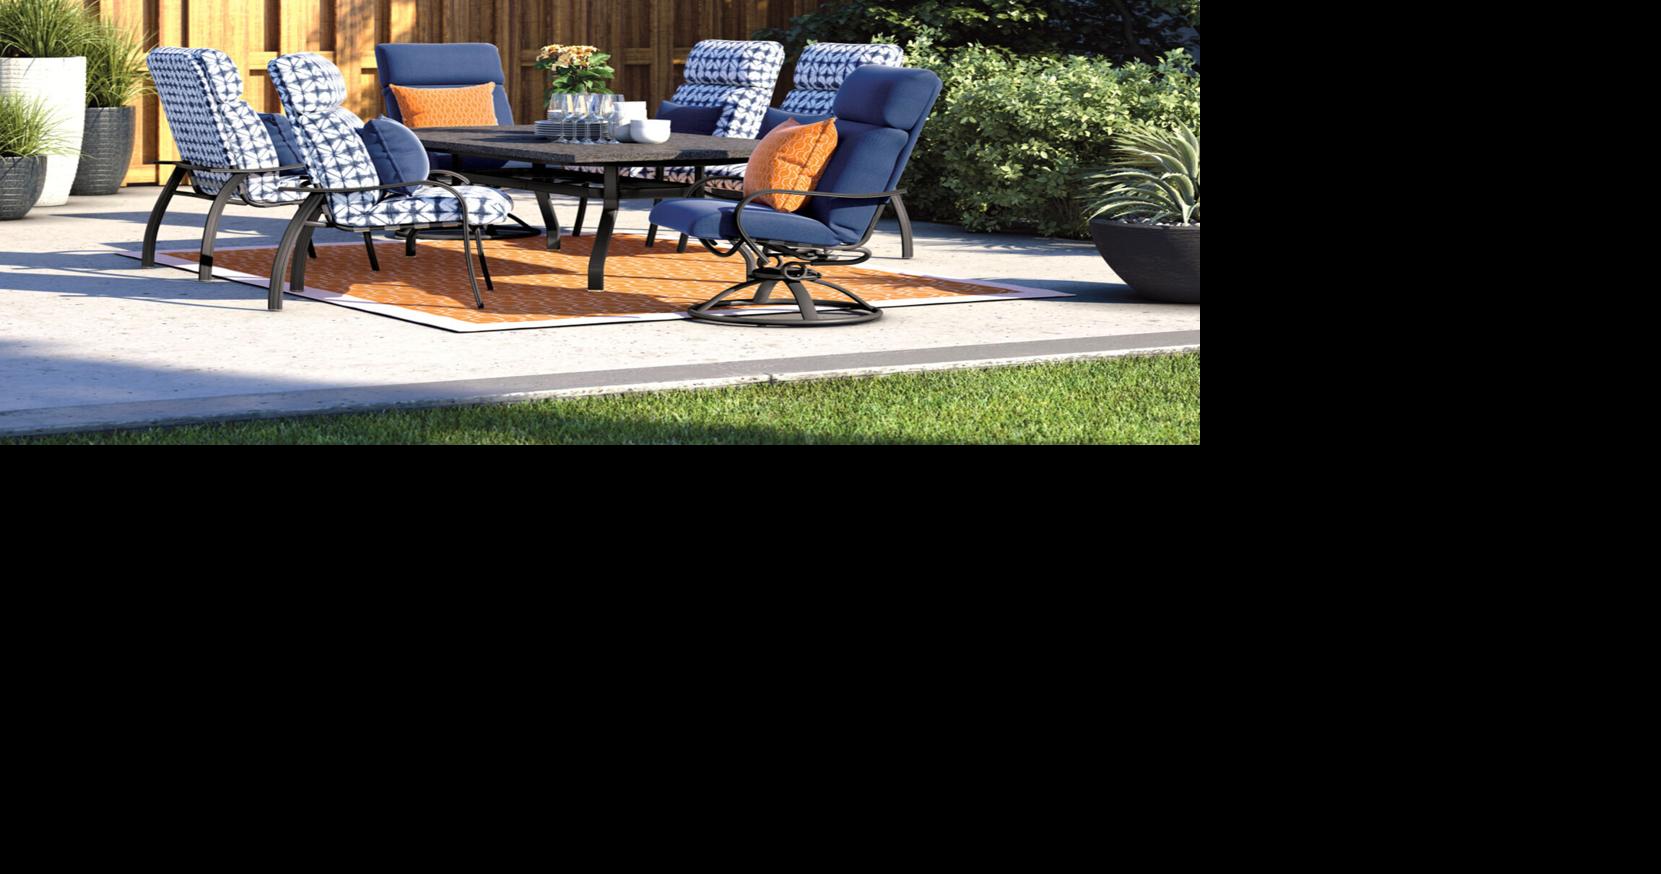 ‘Comfort and quality:’ U.S.-made outdoor furniture brand stands test of time